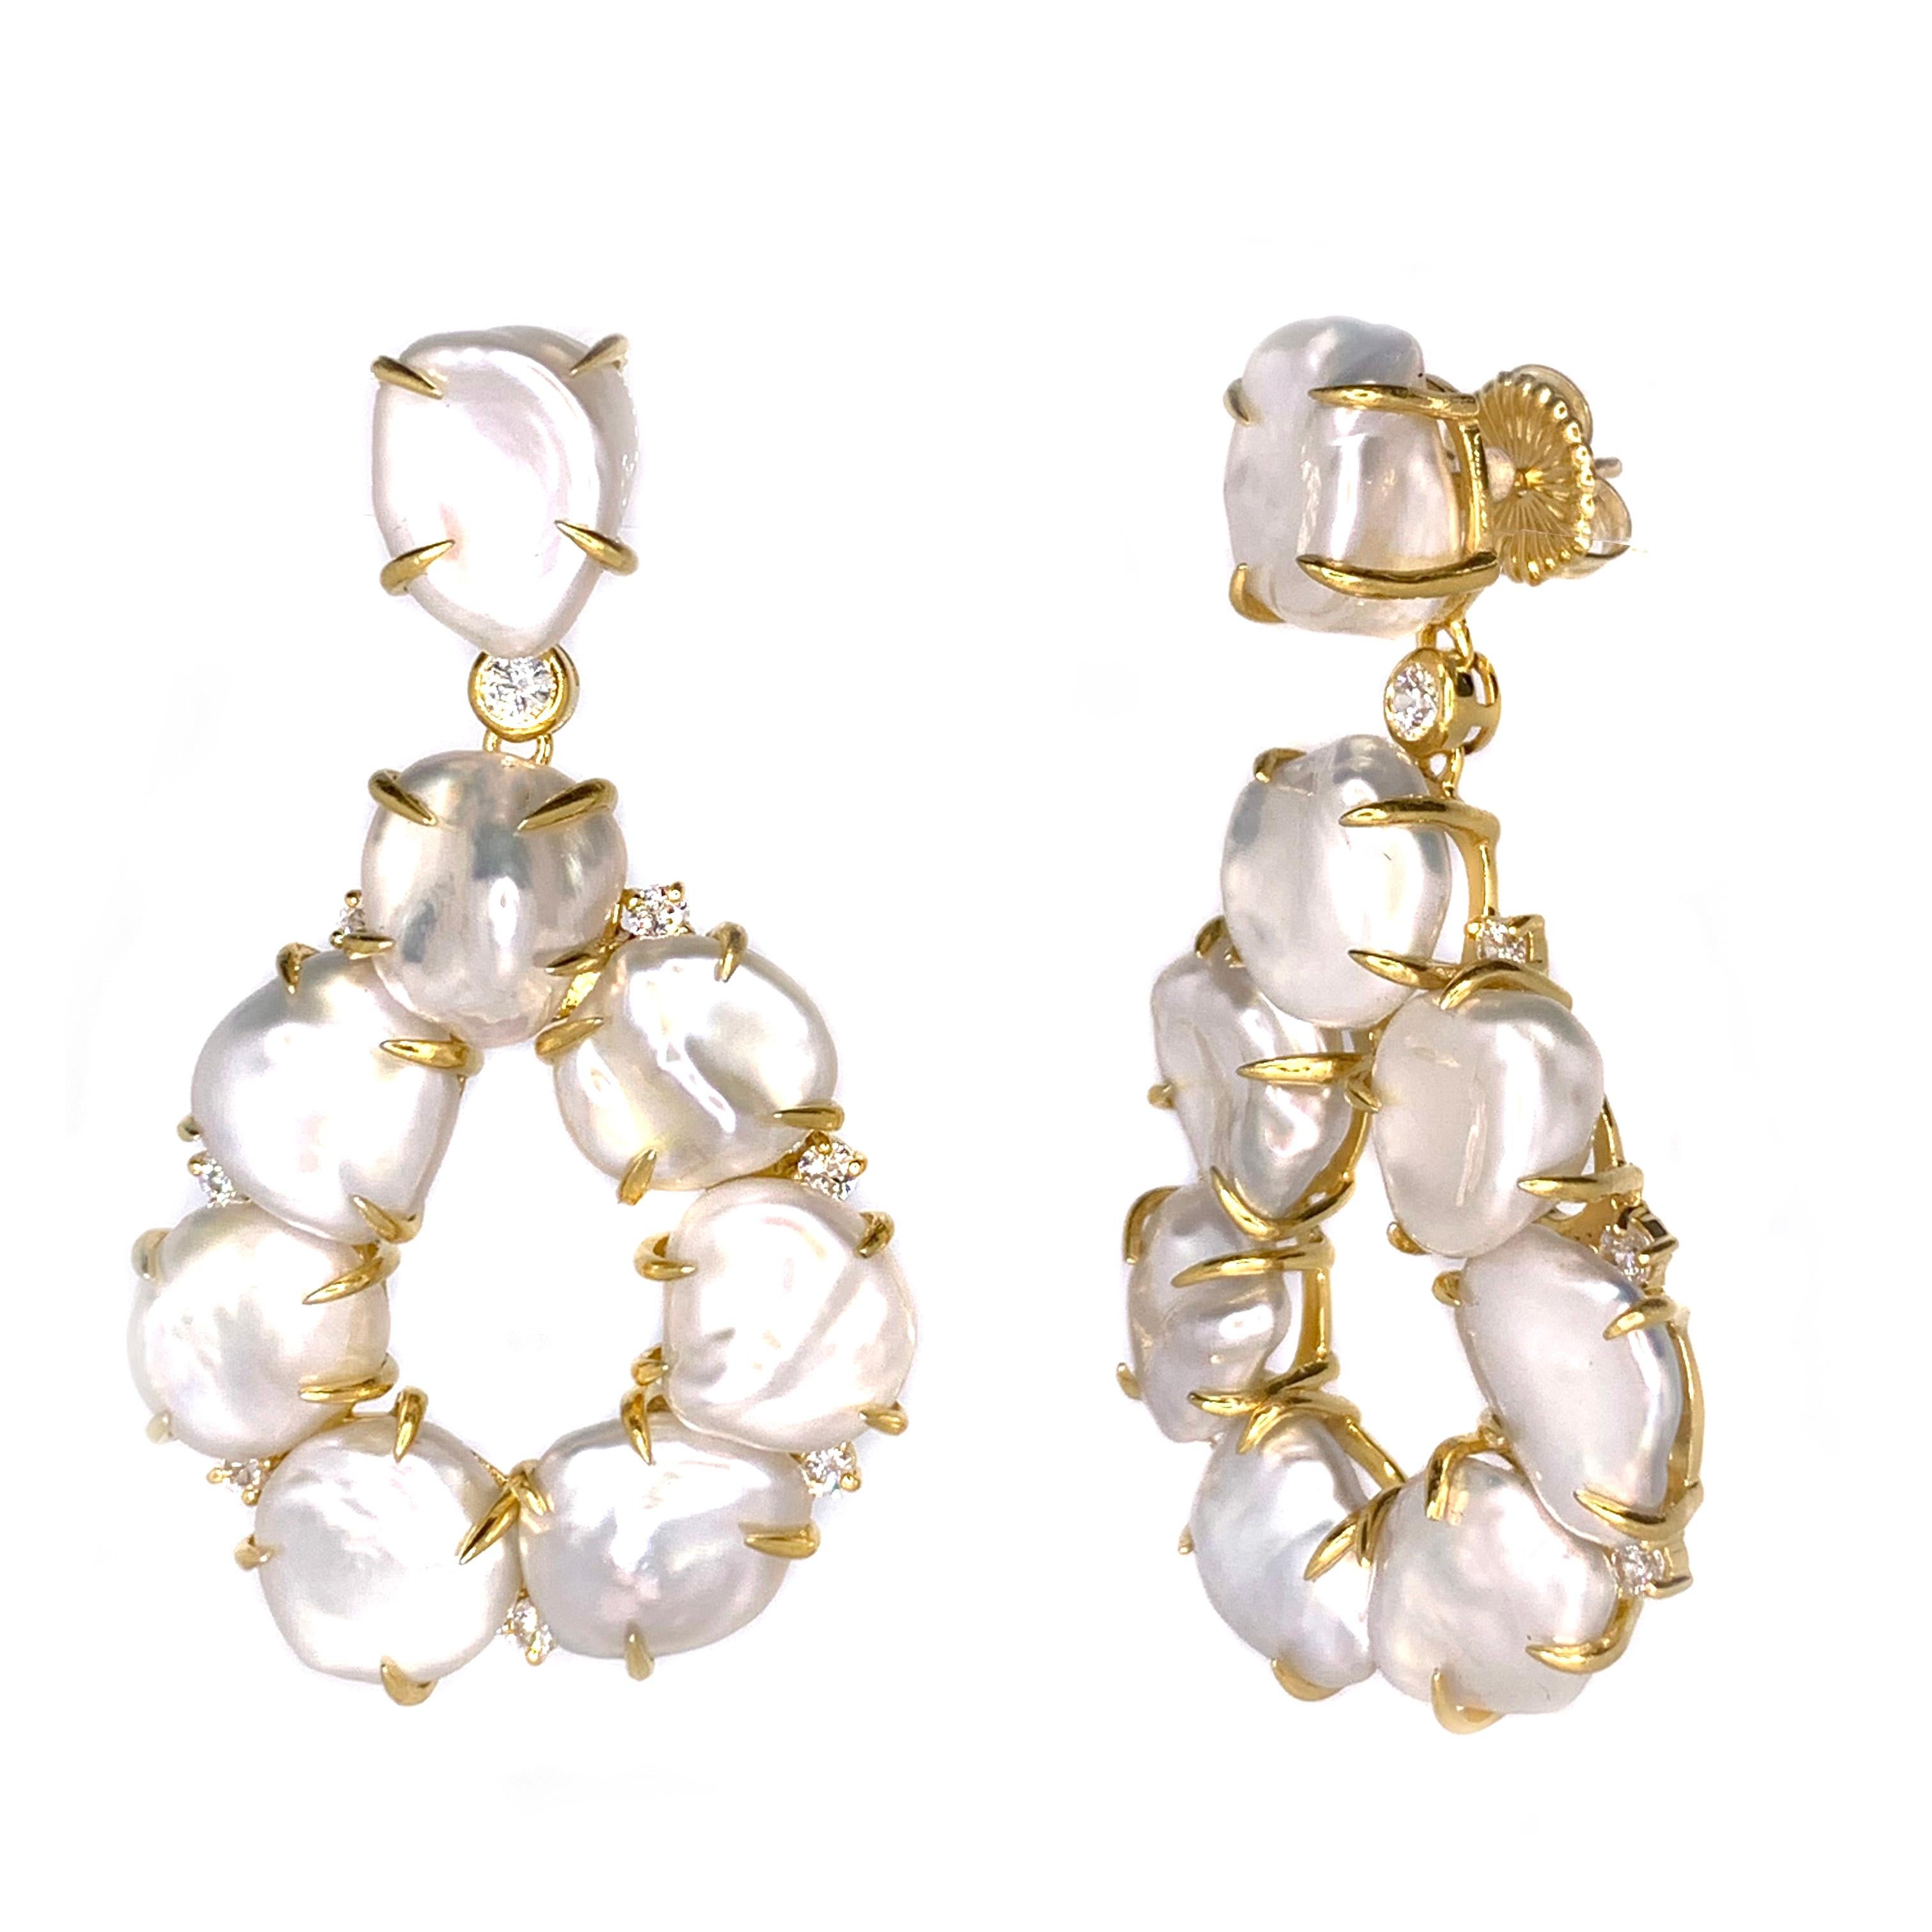 Bijoux Num Keishi Pearl Open Pear Drop Earrings

These stunning pair of earrings features 16 pieces of lustrous cultured Japanese Keishi pearls adorned with round simulated diamonds, handset in 18k yellow gold vermeil over sterling silver.  Straight